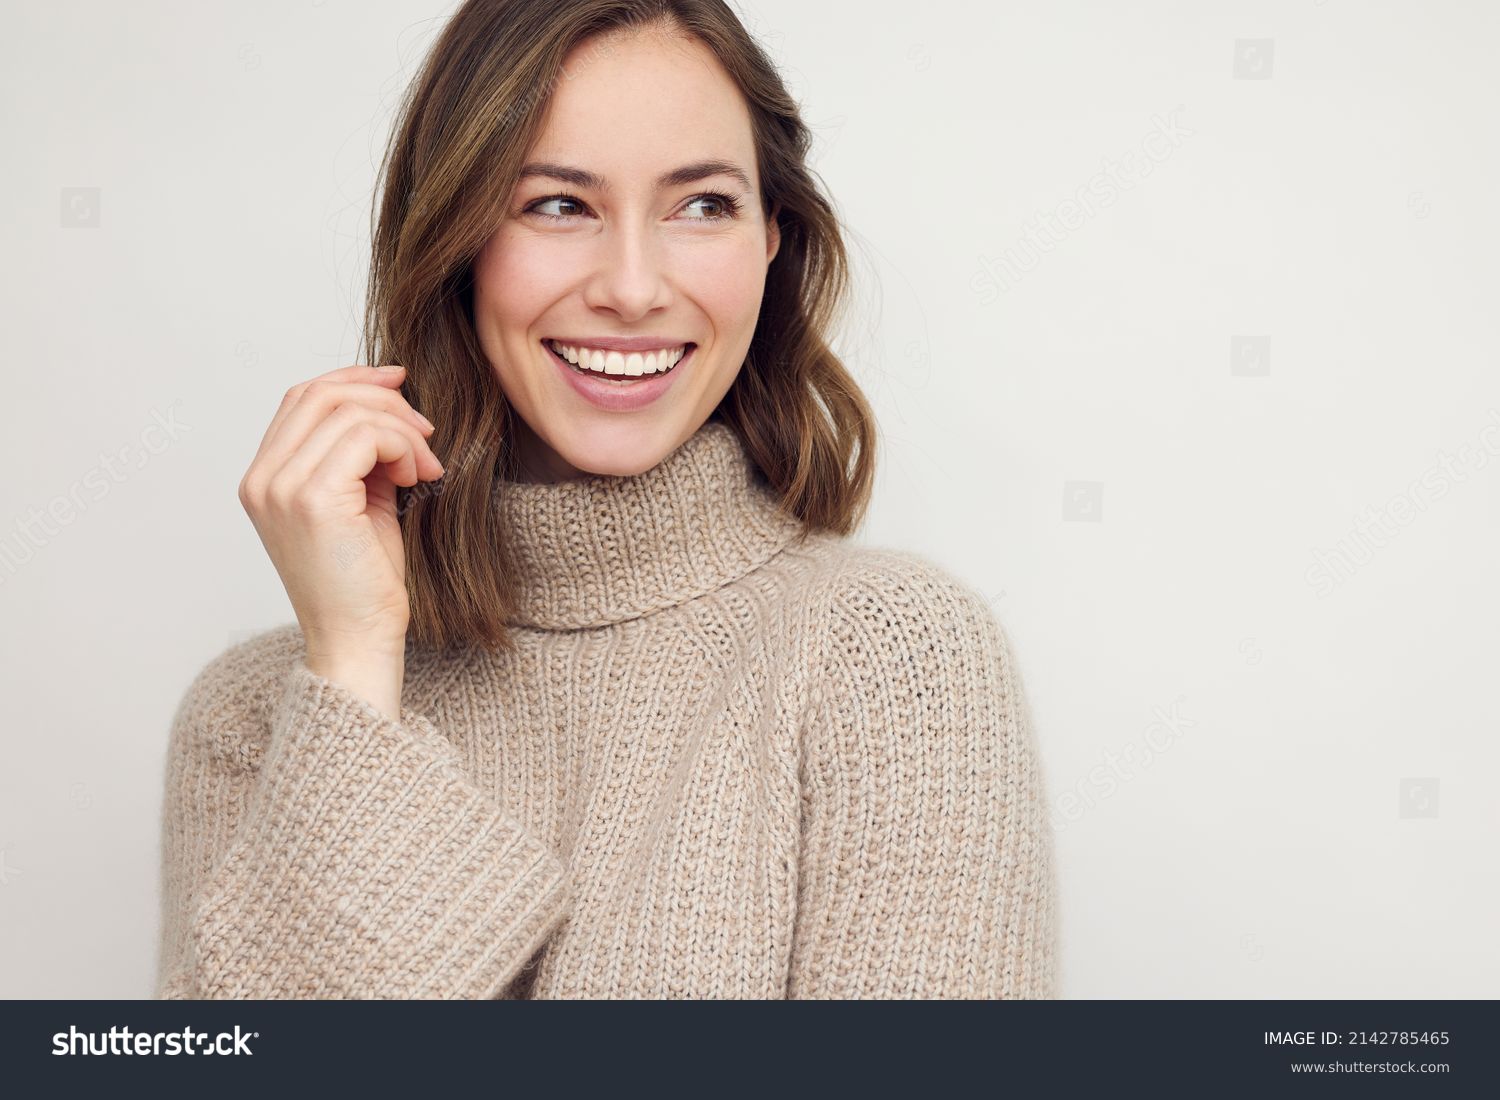 Portrait of young happy beautiful woman smiling and standing isolated on white background in a warm sweater. Young female girl with a perfect smile looking right. #2142785465